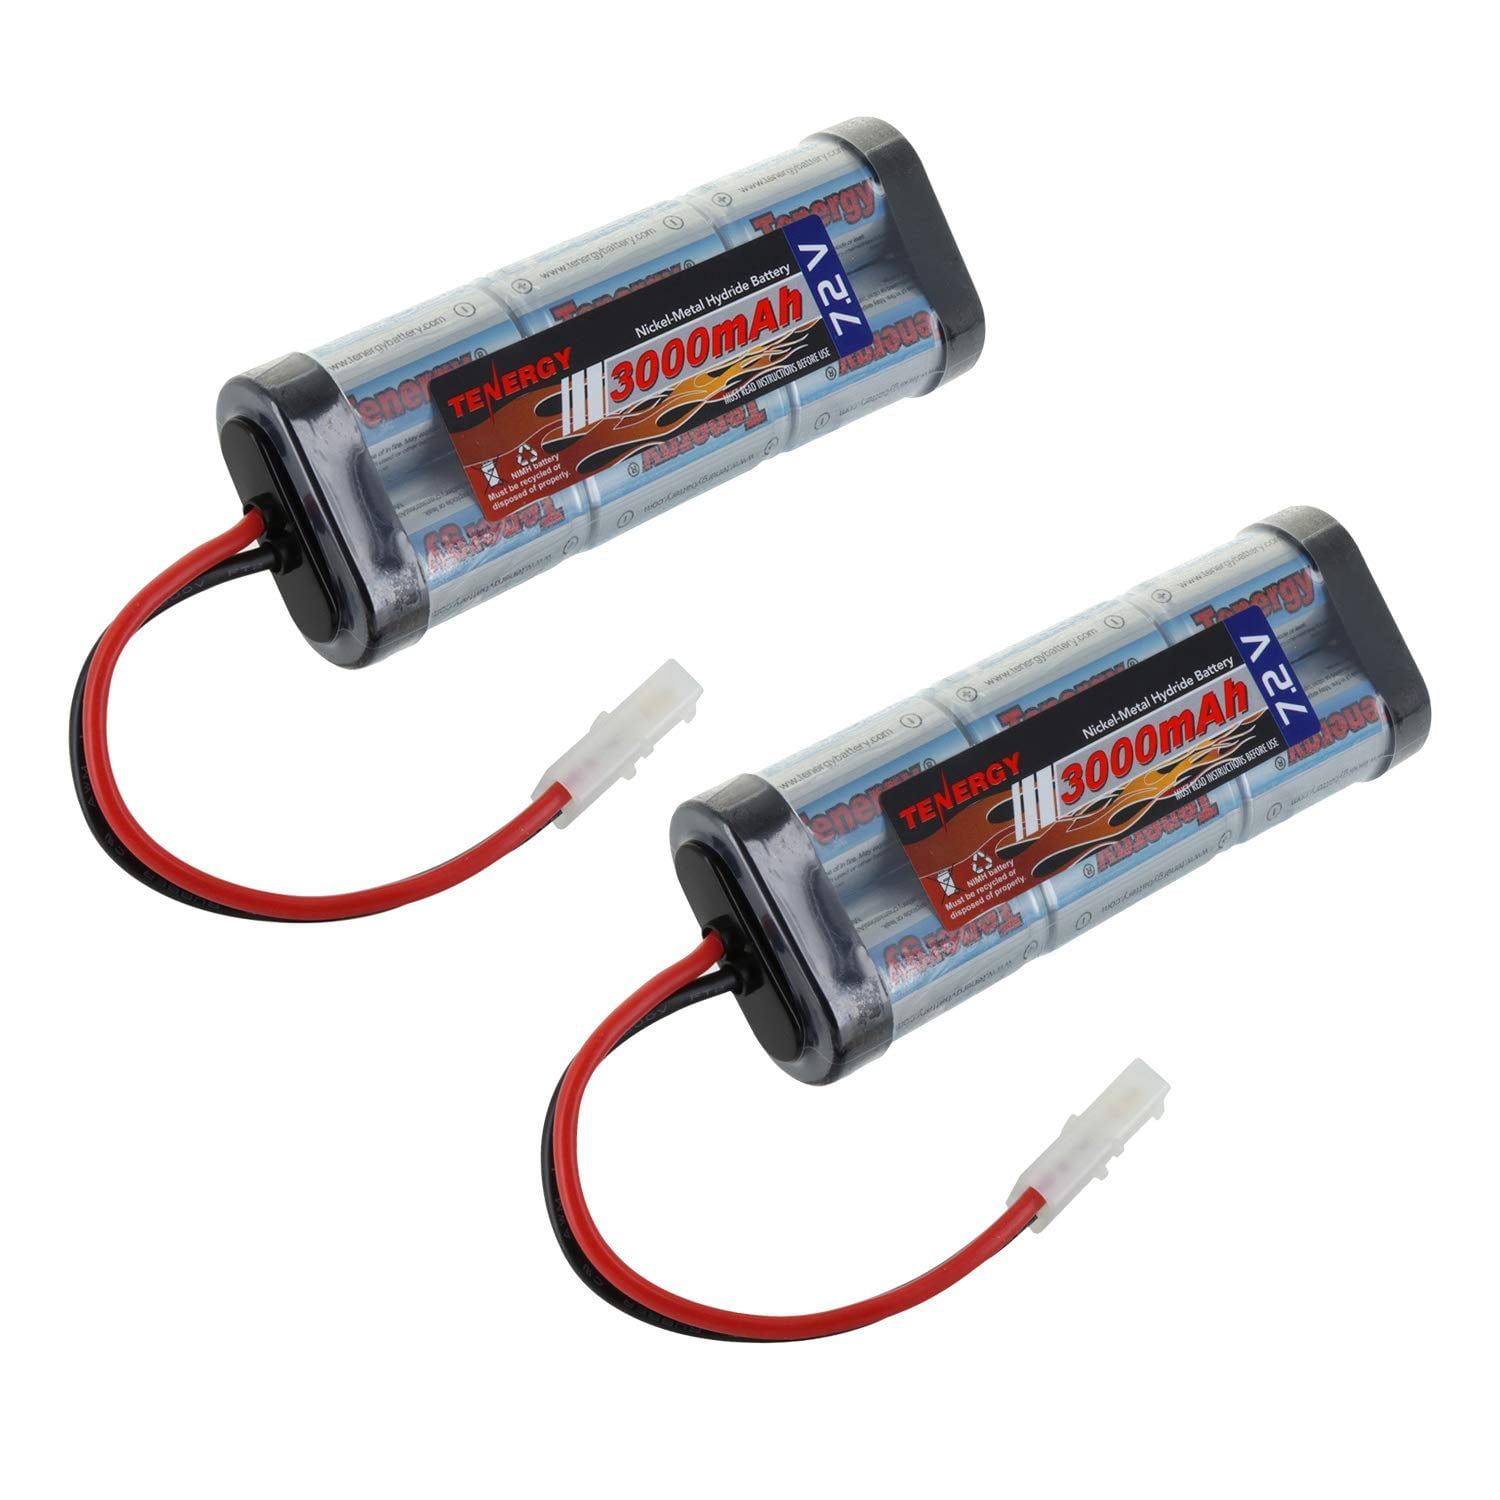 Charger Combo 7.2V 3000MAH 6 Cell BATTERY PACK Quick CHARGER RC Battery 